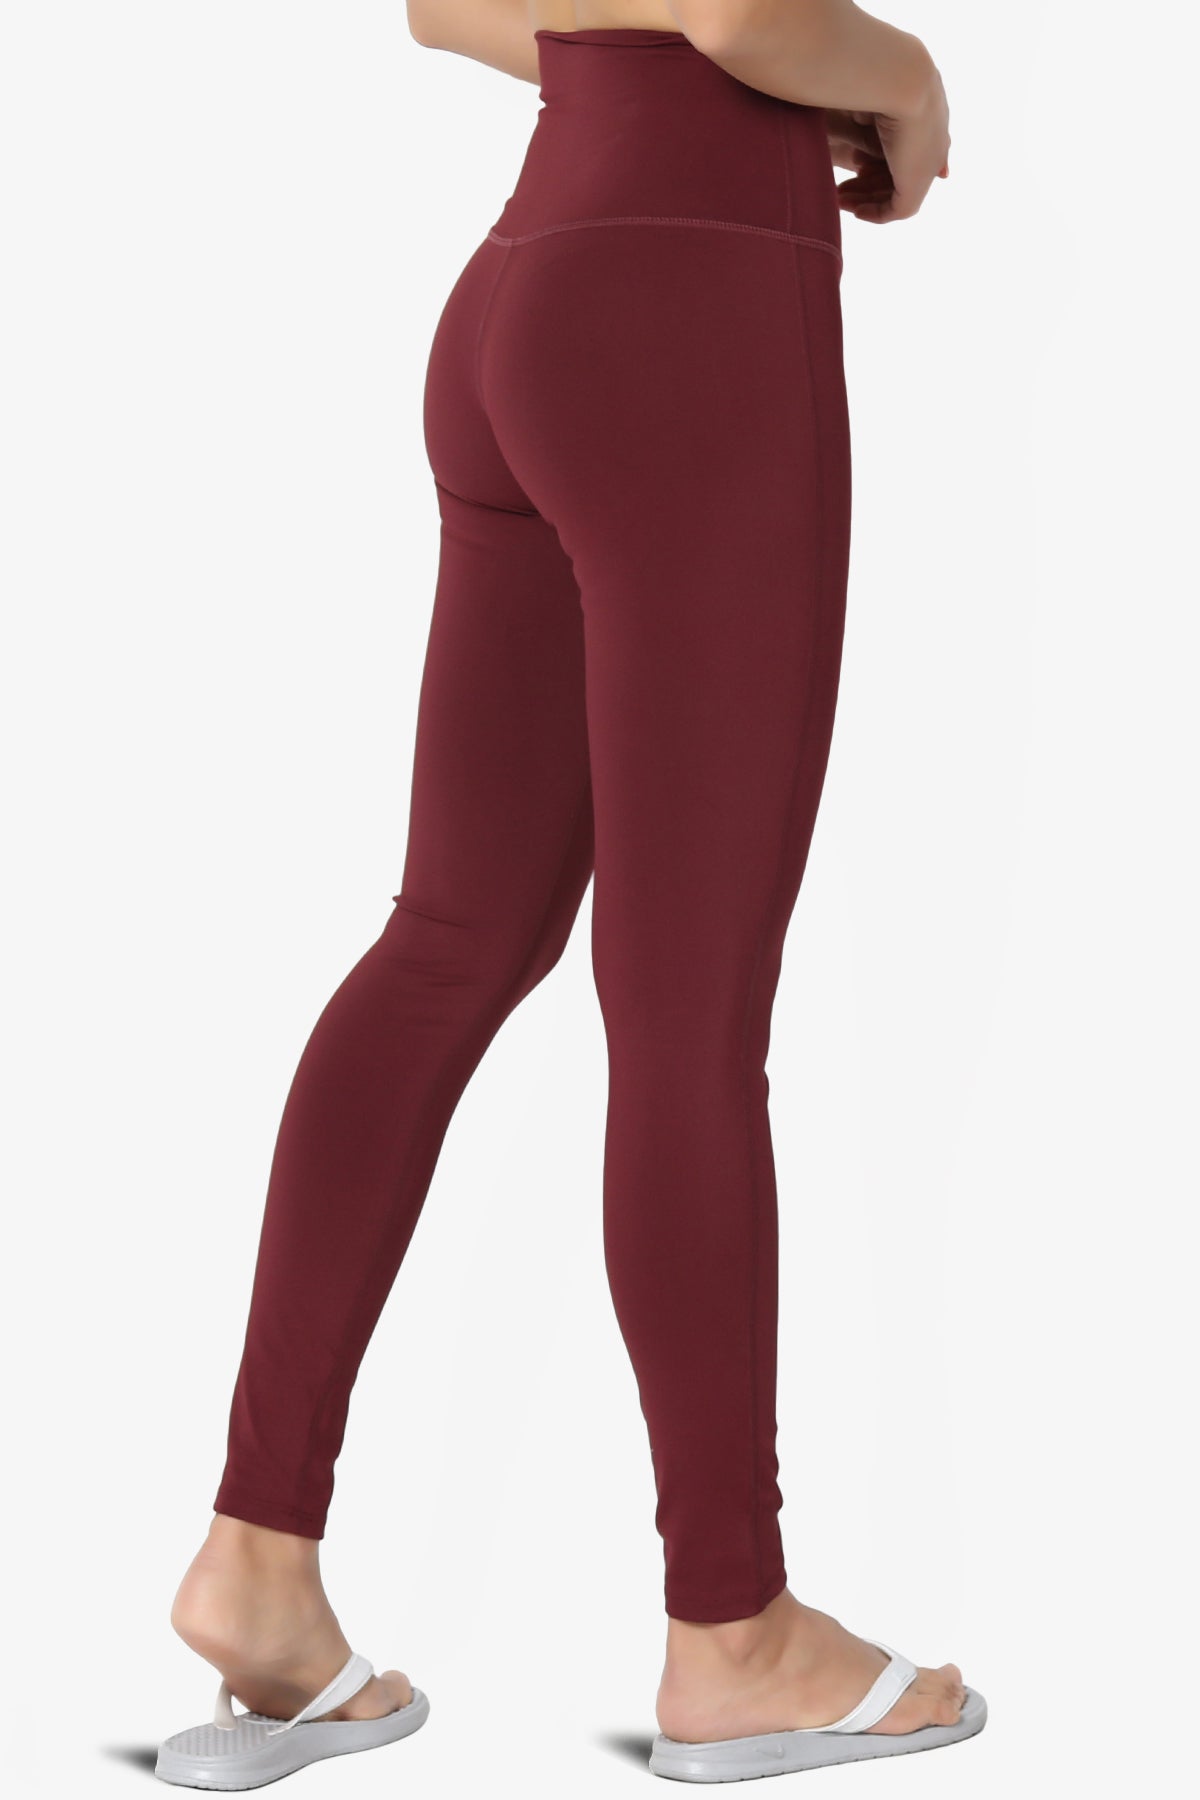 Mosco Athletic High Rise Ankle Leggings